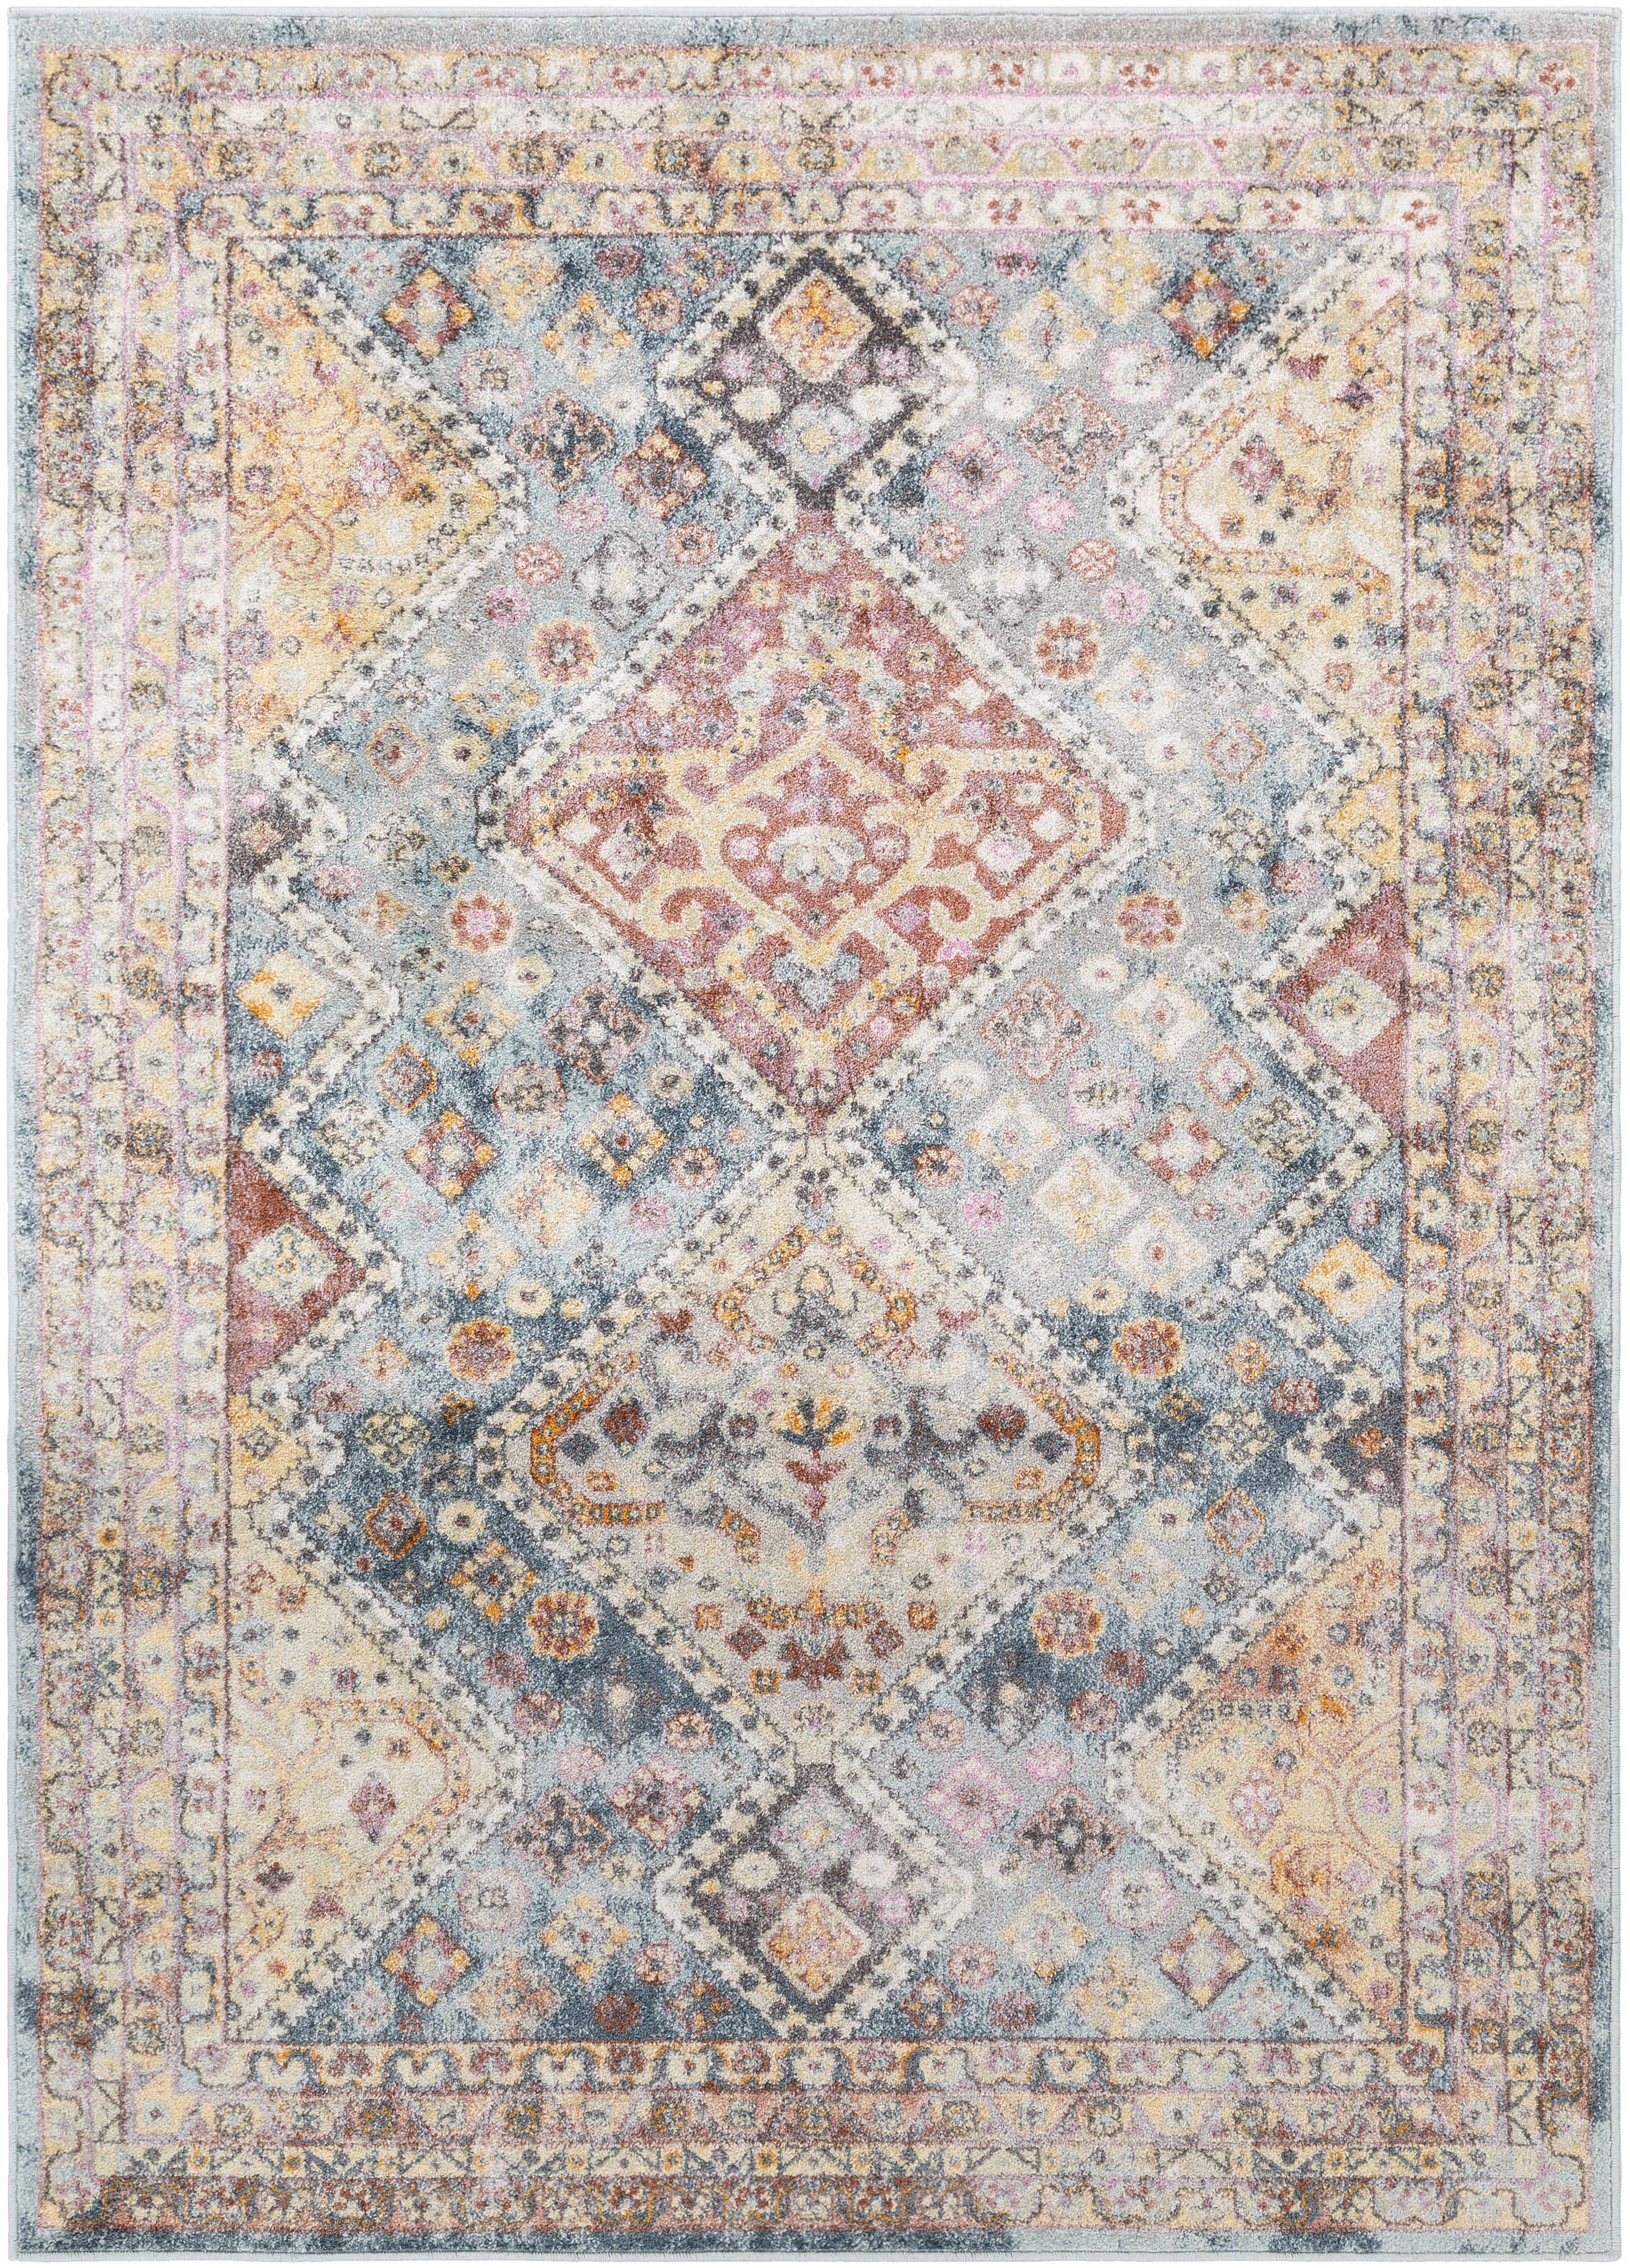 New Mexico Rug, 5'3" x 7'3" - Image 0